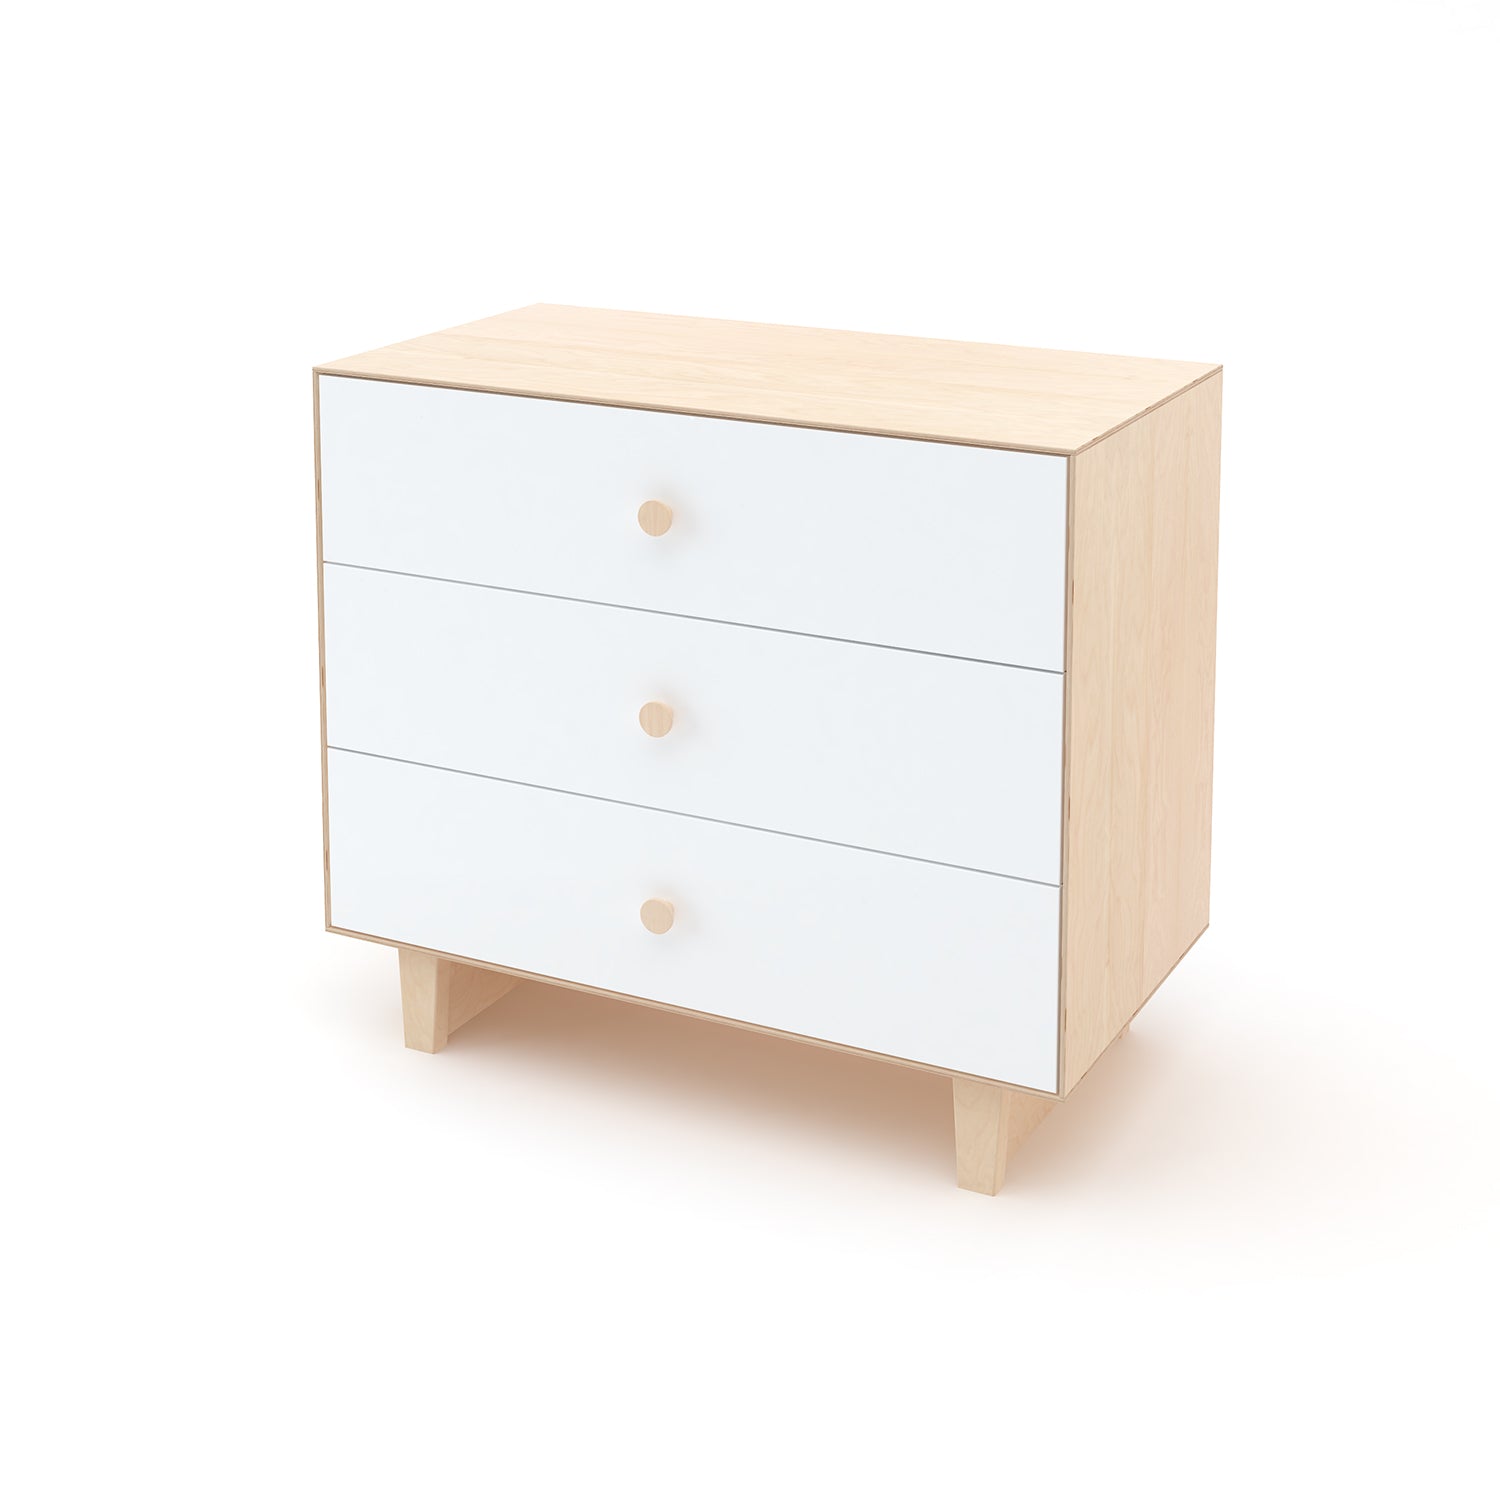 Oeuf NYC Merlin chest of drawers white/birch